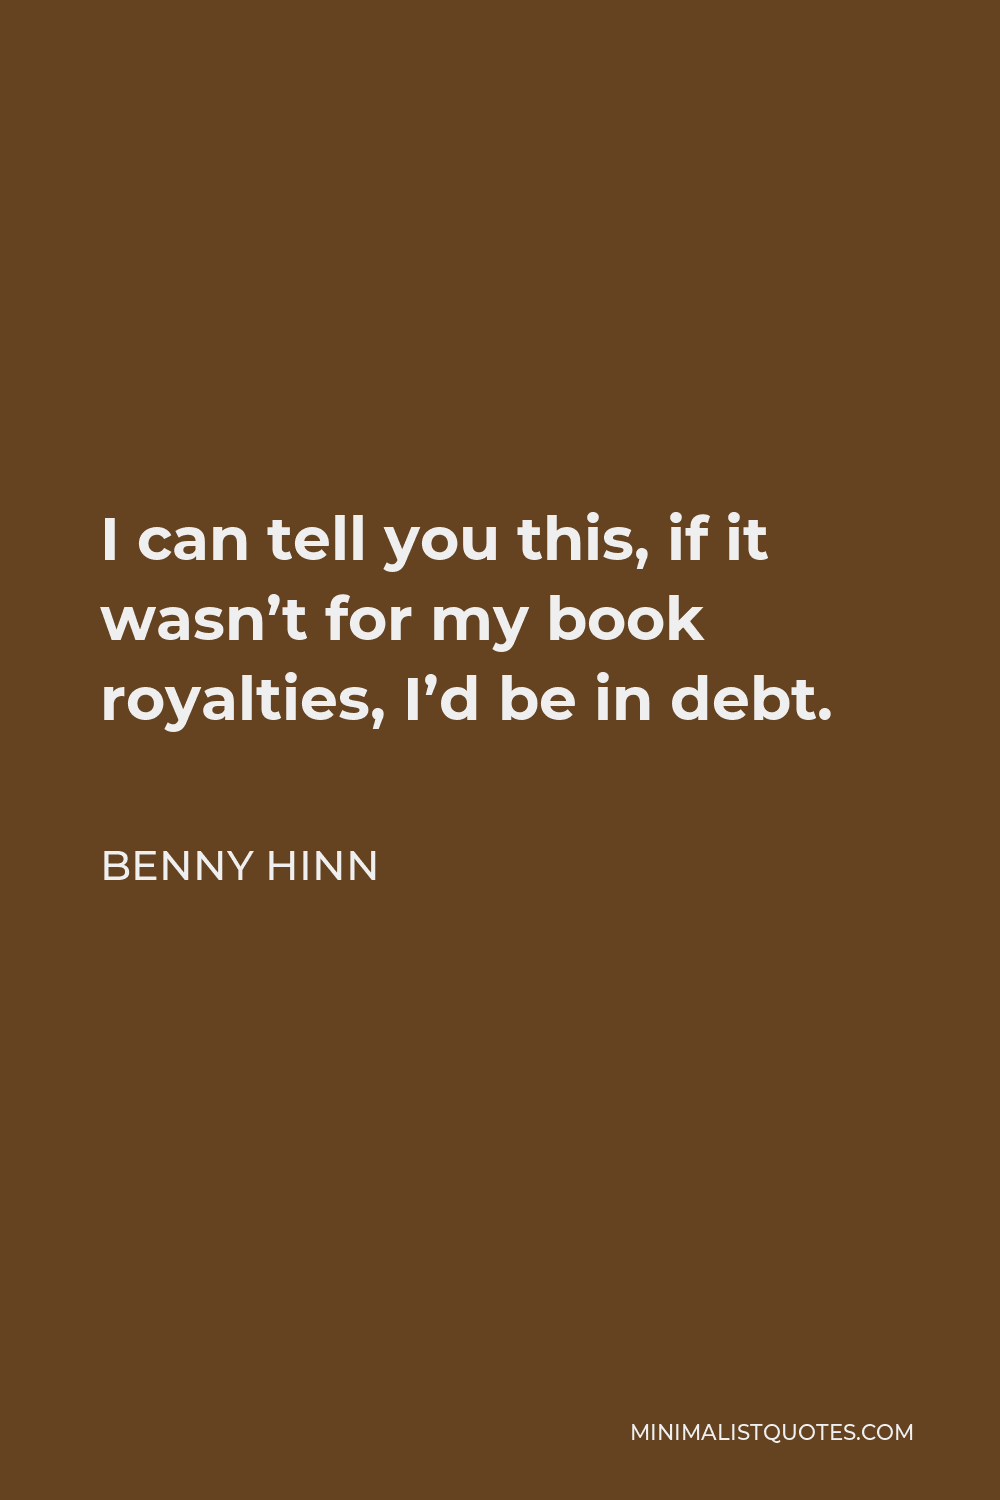 Benny Hinn Quote - I can tell you this, if it wasn’t for my book royalties, I’d be in debt.